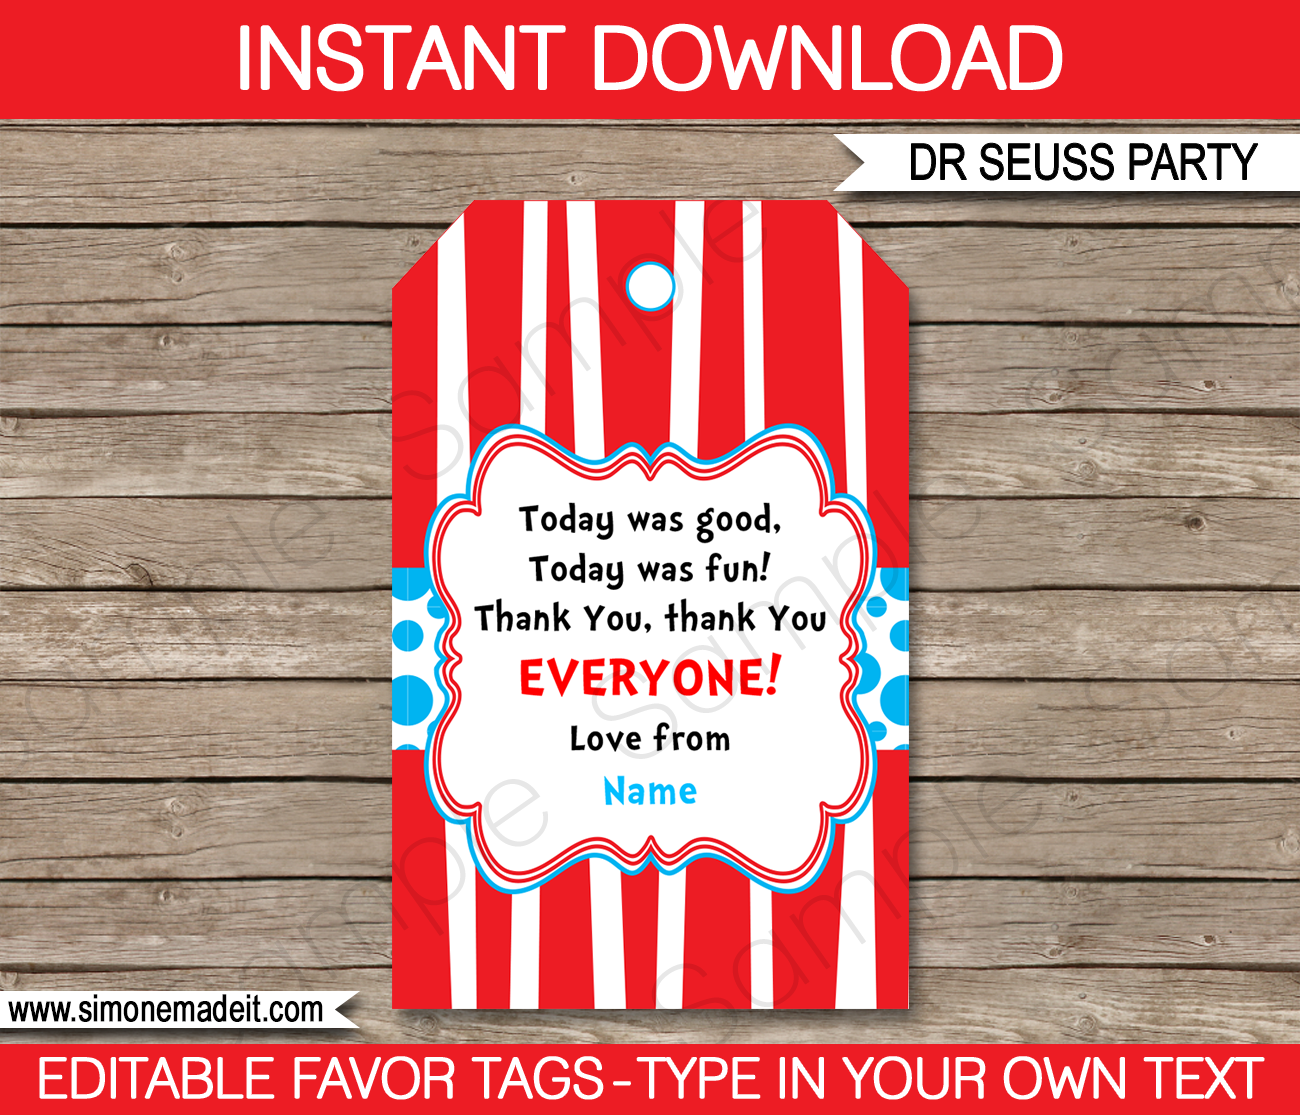 Dr Seuss Party Favor Tags | Thank You Tags | Birthday Party | Editable DIY Template | $3.00 INSTANT DOWNLOAD via SIMONEmadeit.com